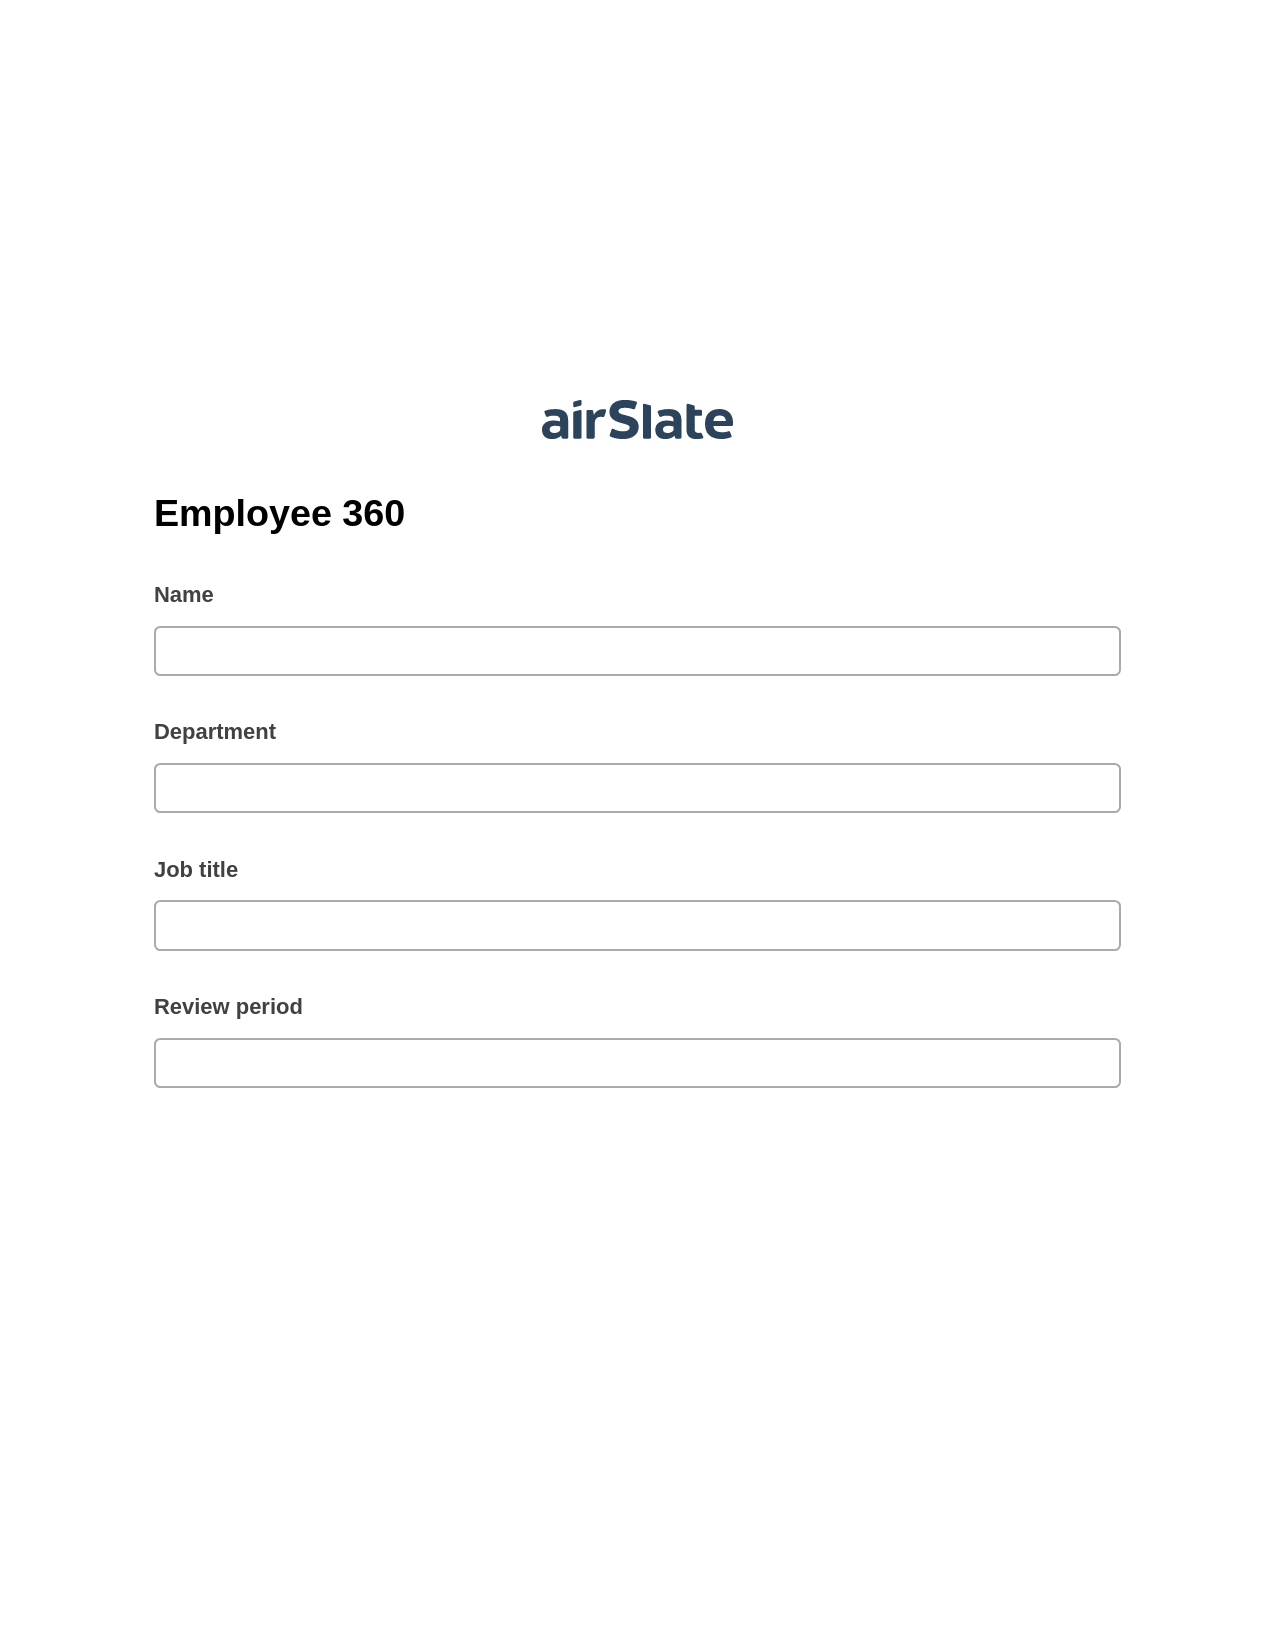 Multirole Employee 360 Pre-fill from Excel Spreadsheet Bot, Lock the Slate Bot, Archive to Google Drive Bot